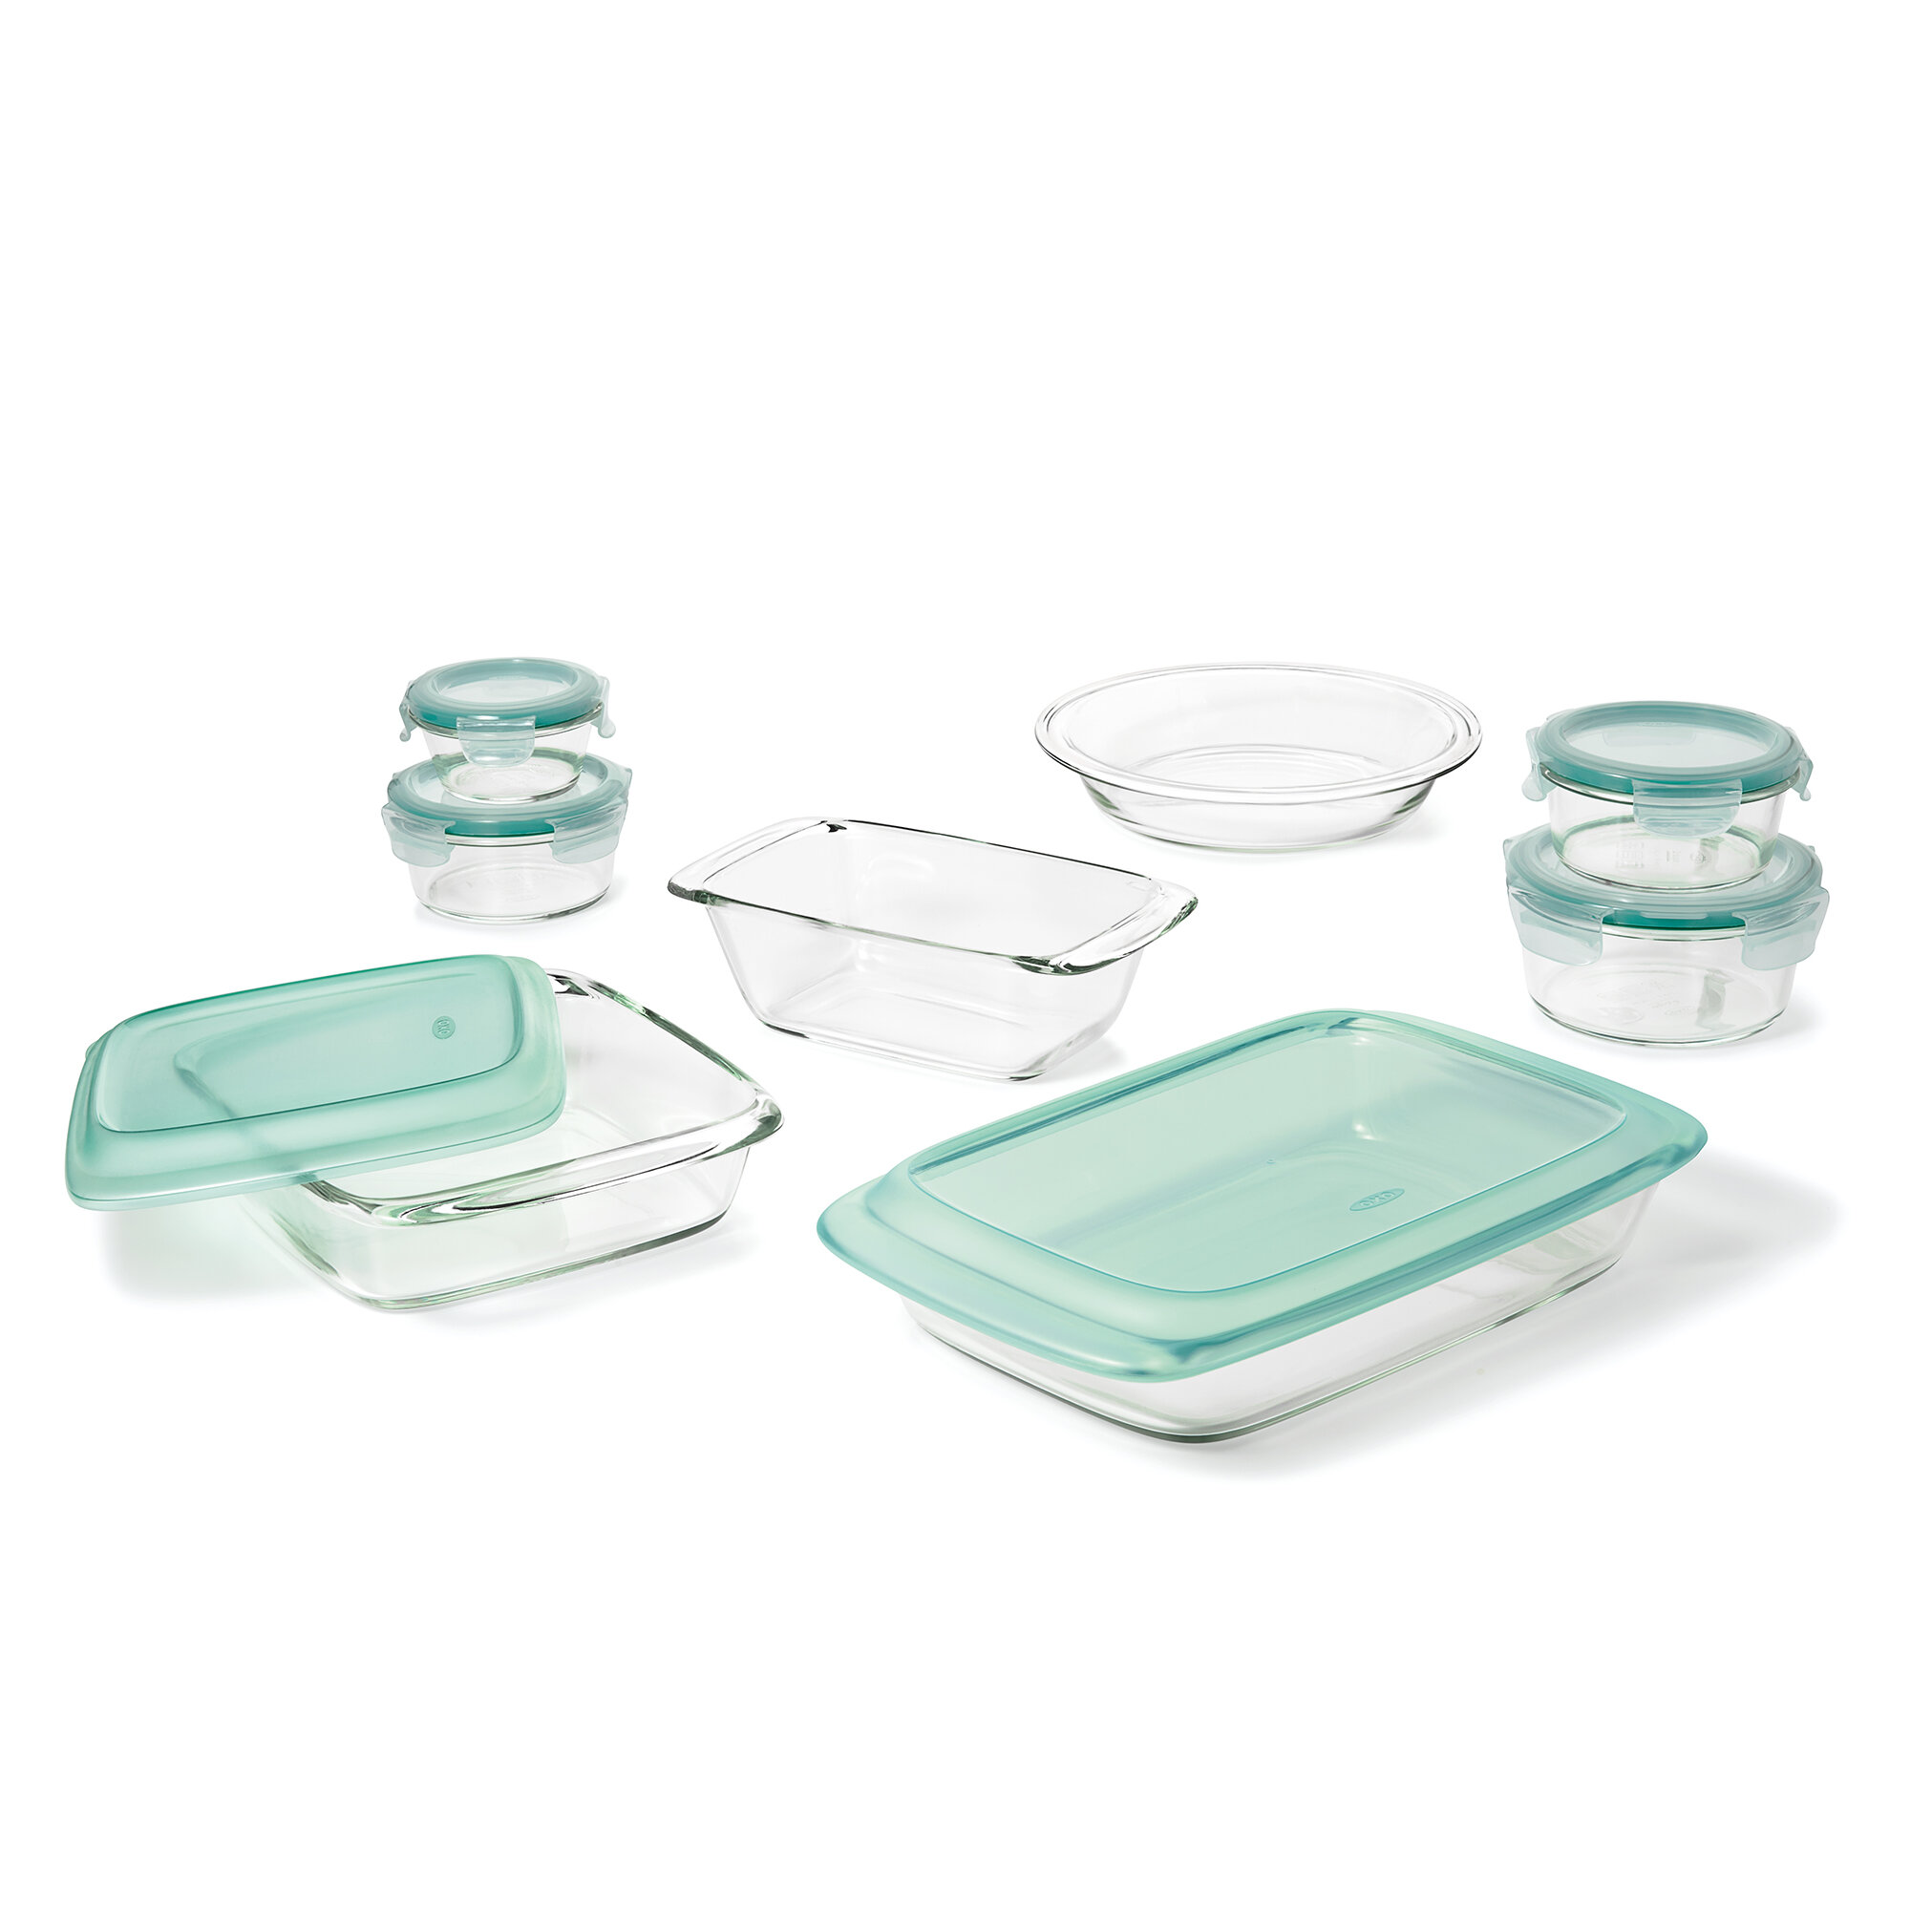 OXO Good Grips 14-Piece Glass Bake, Serve and Store Bakeware Set & Reviews